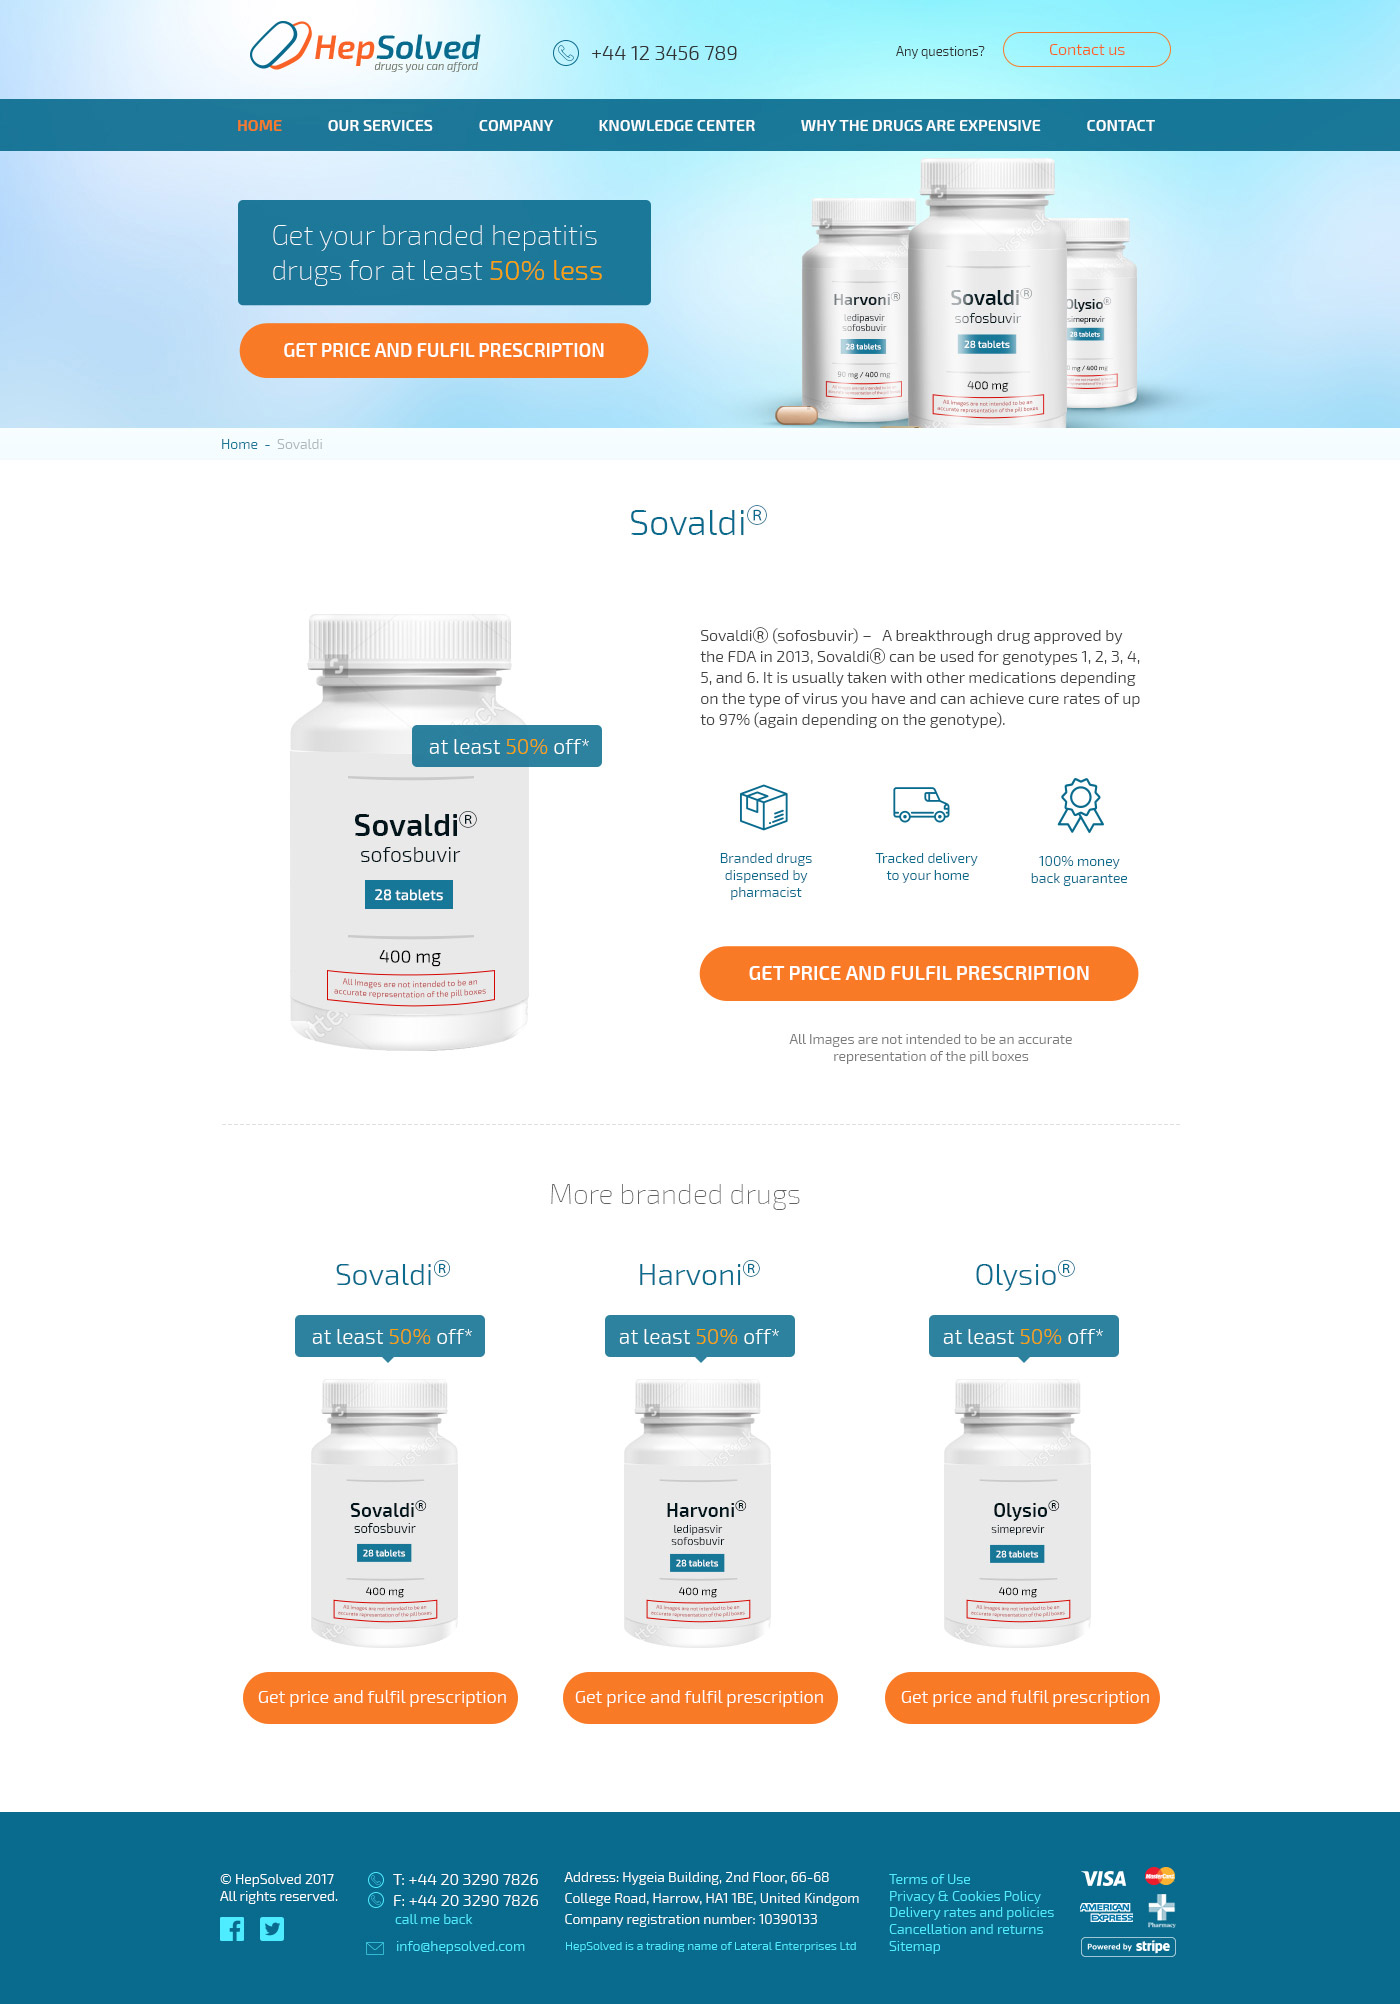 Product page design of HepSolved website